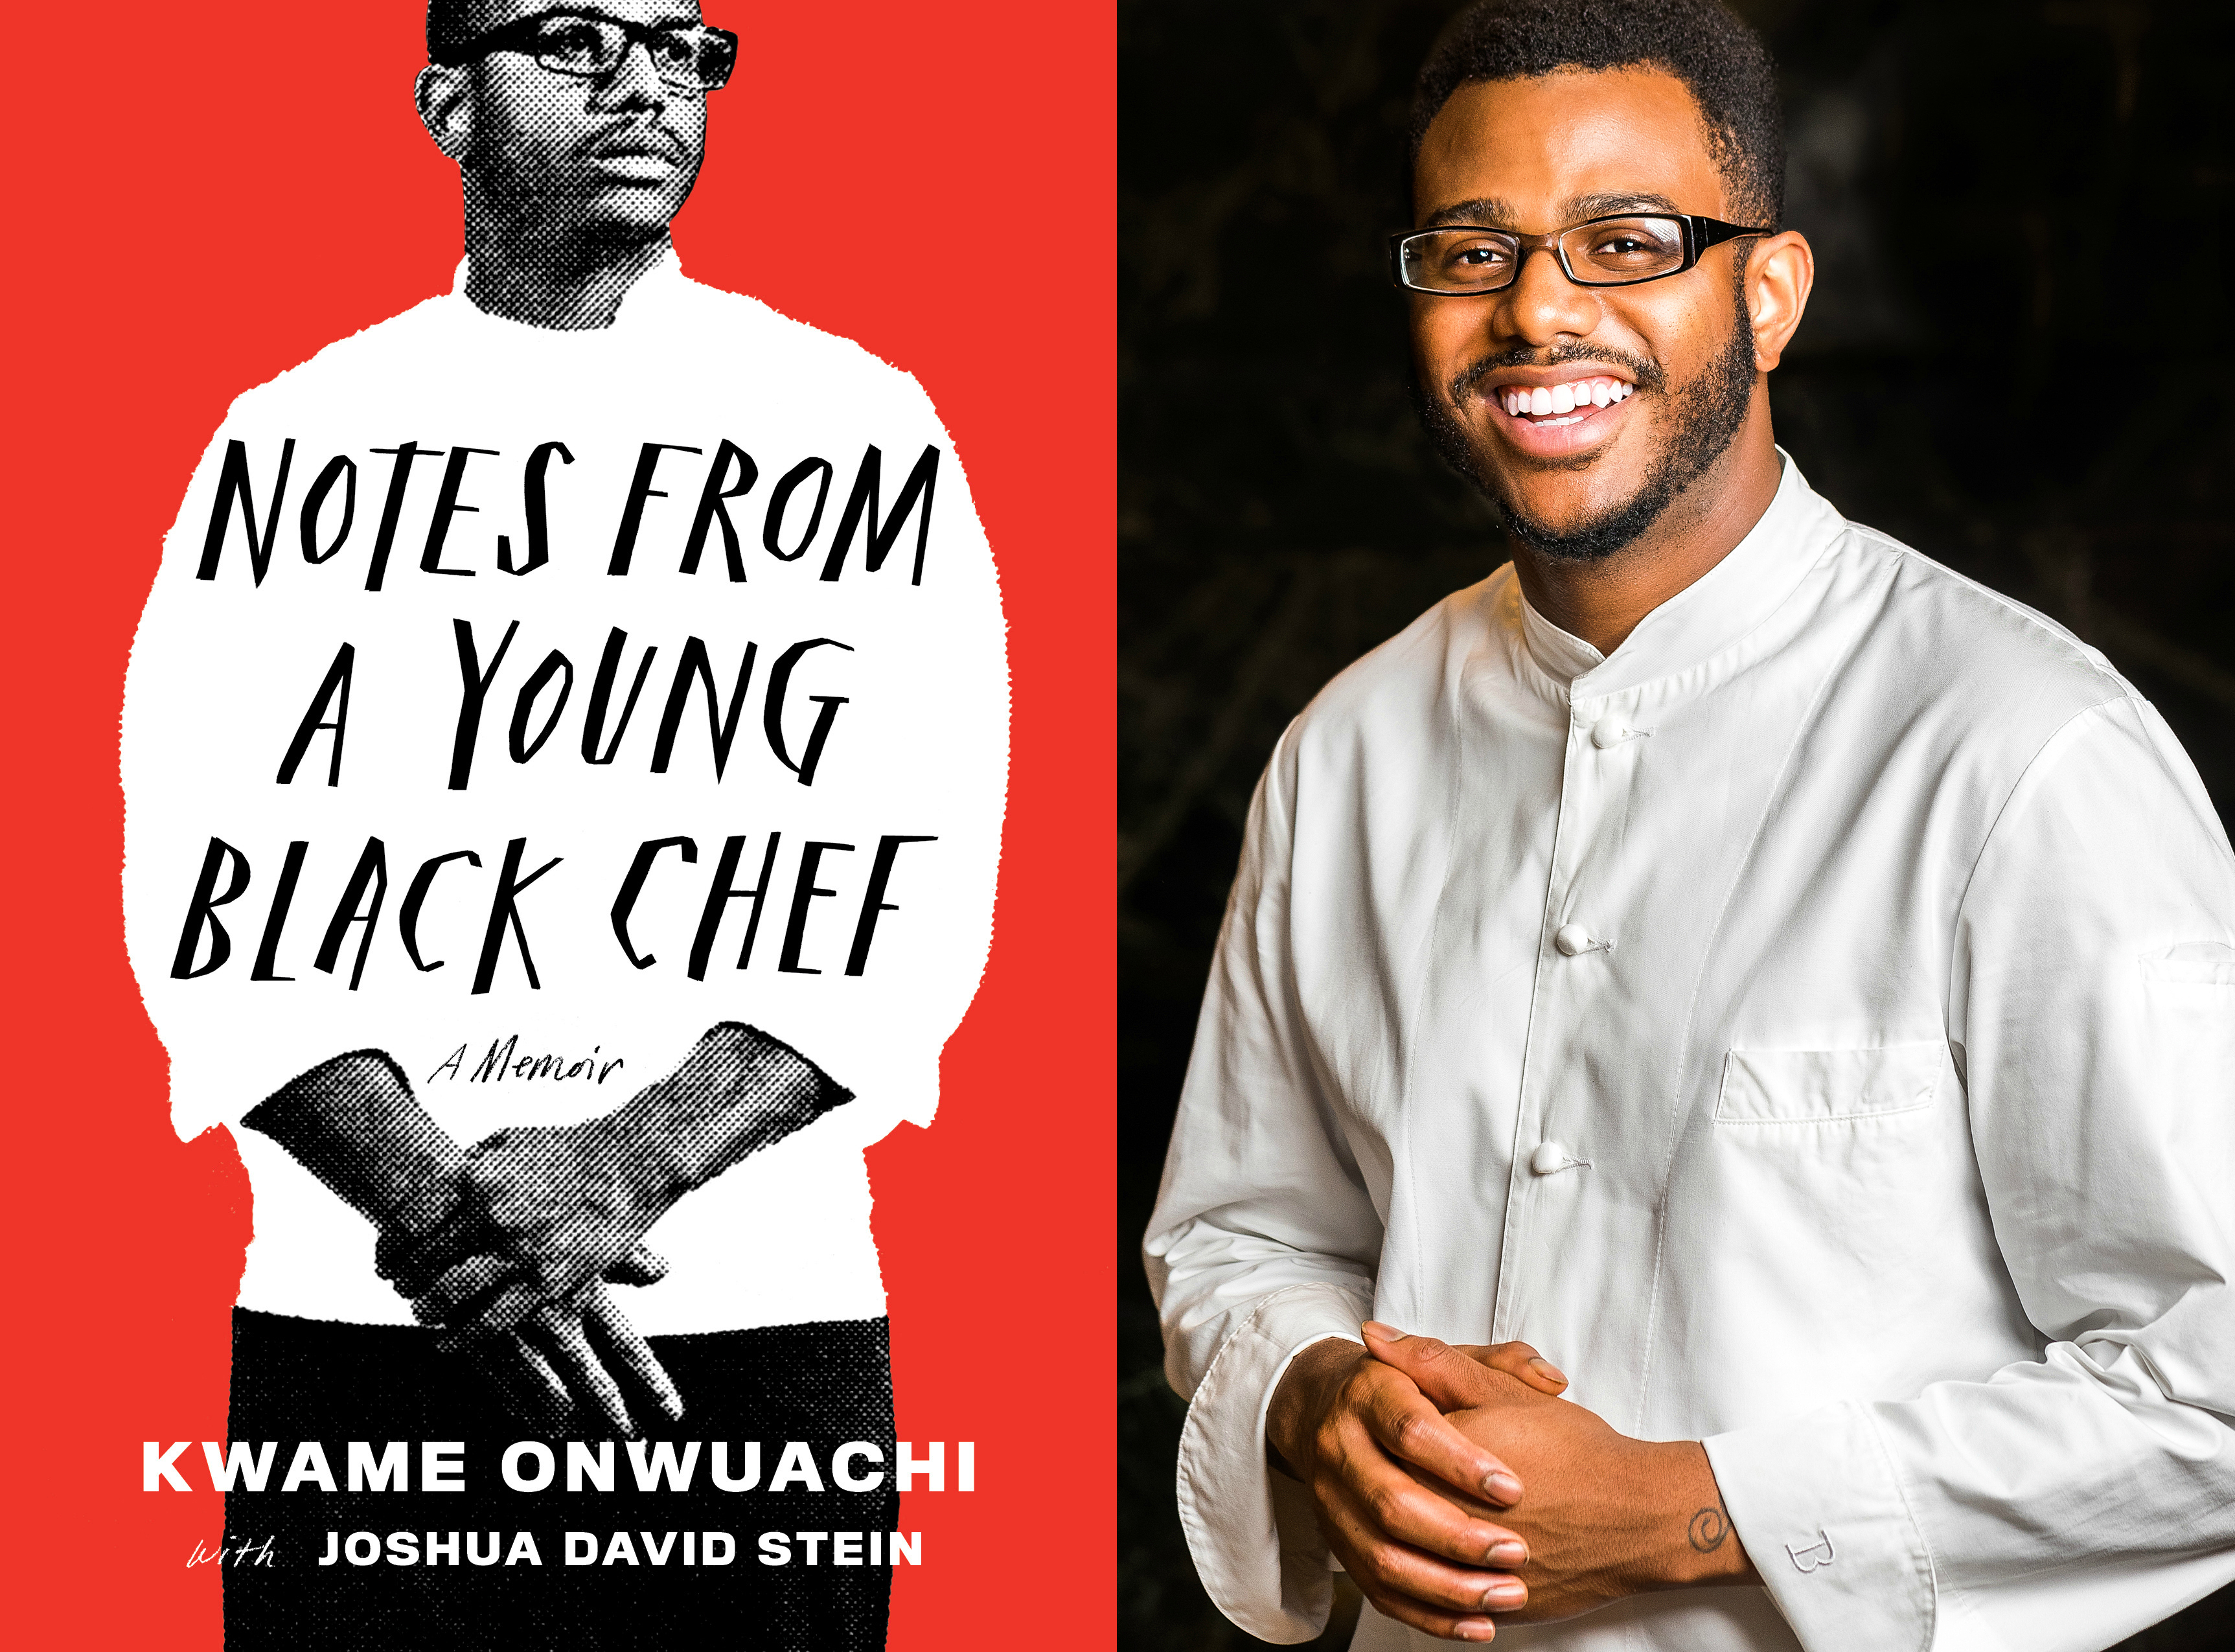 Cover photo of Notes from a Young Black Chef and photo of Kwame Onwuachi